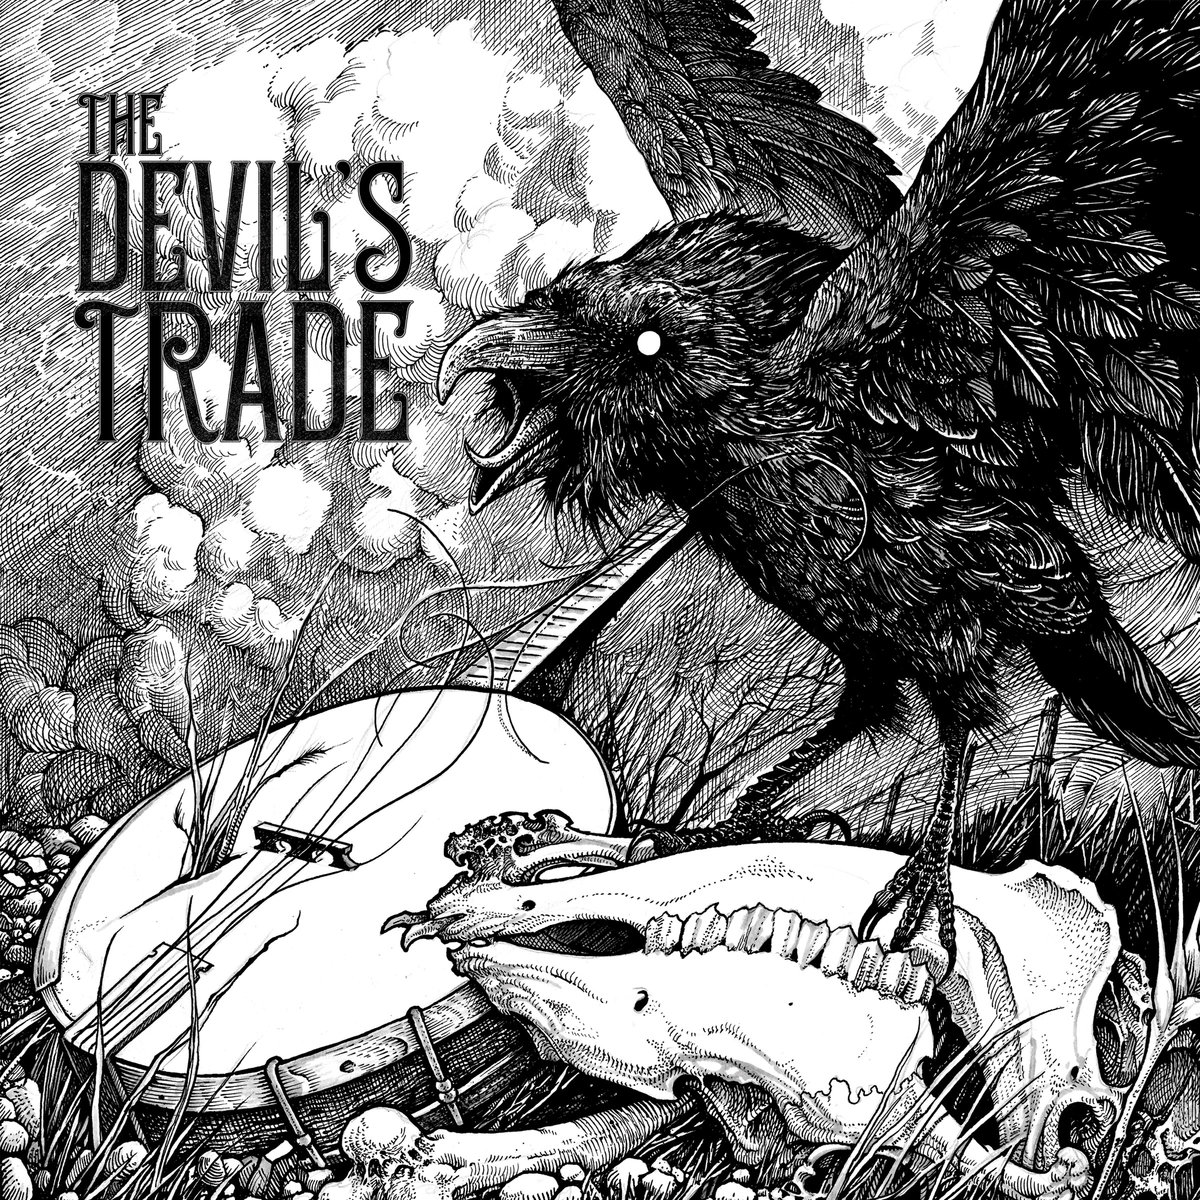 The Devil's Trade - What Happened to the Little Blind Crow